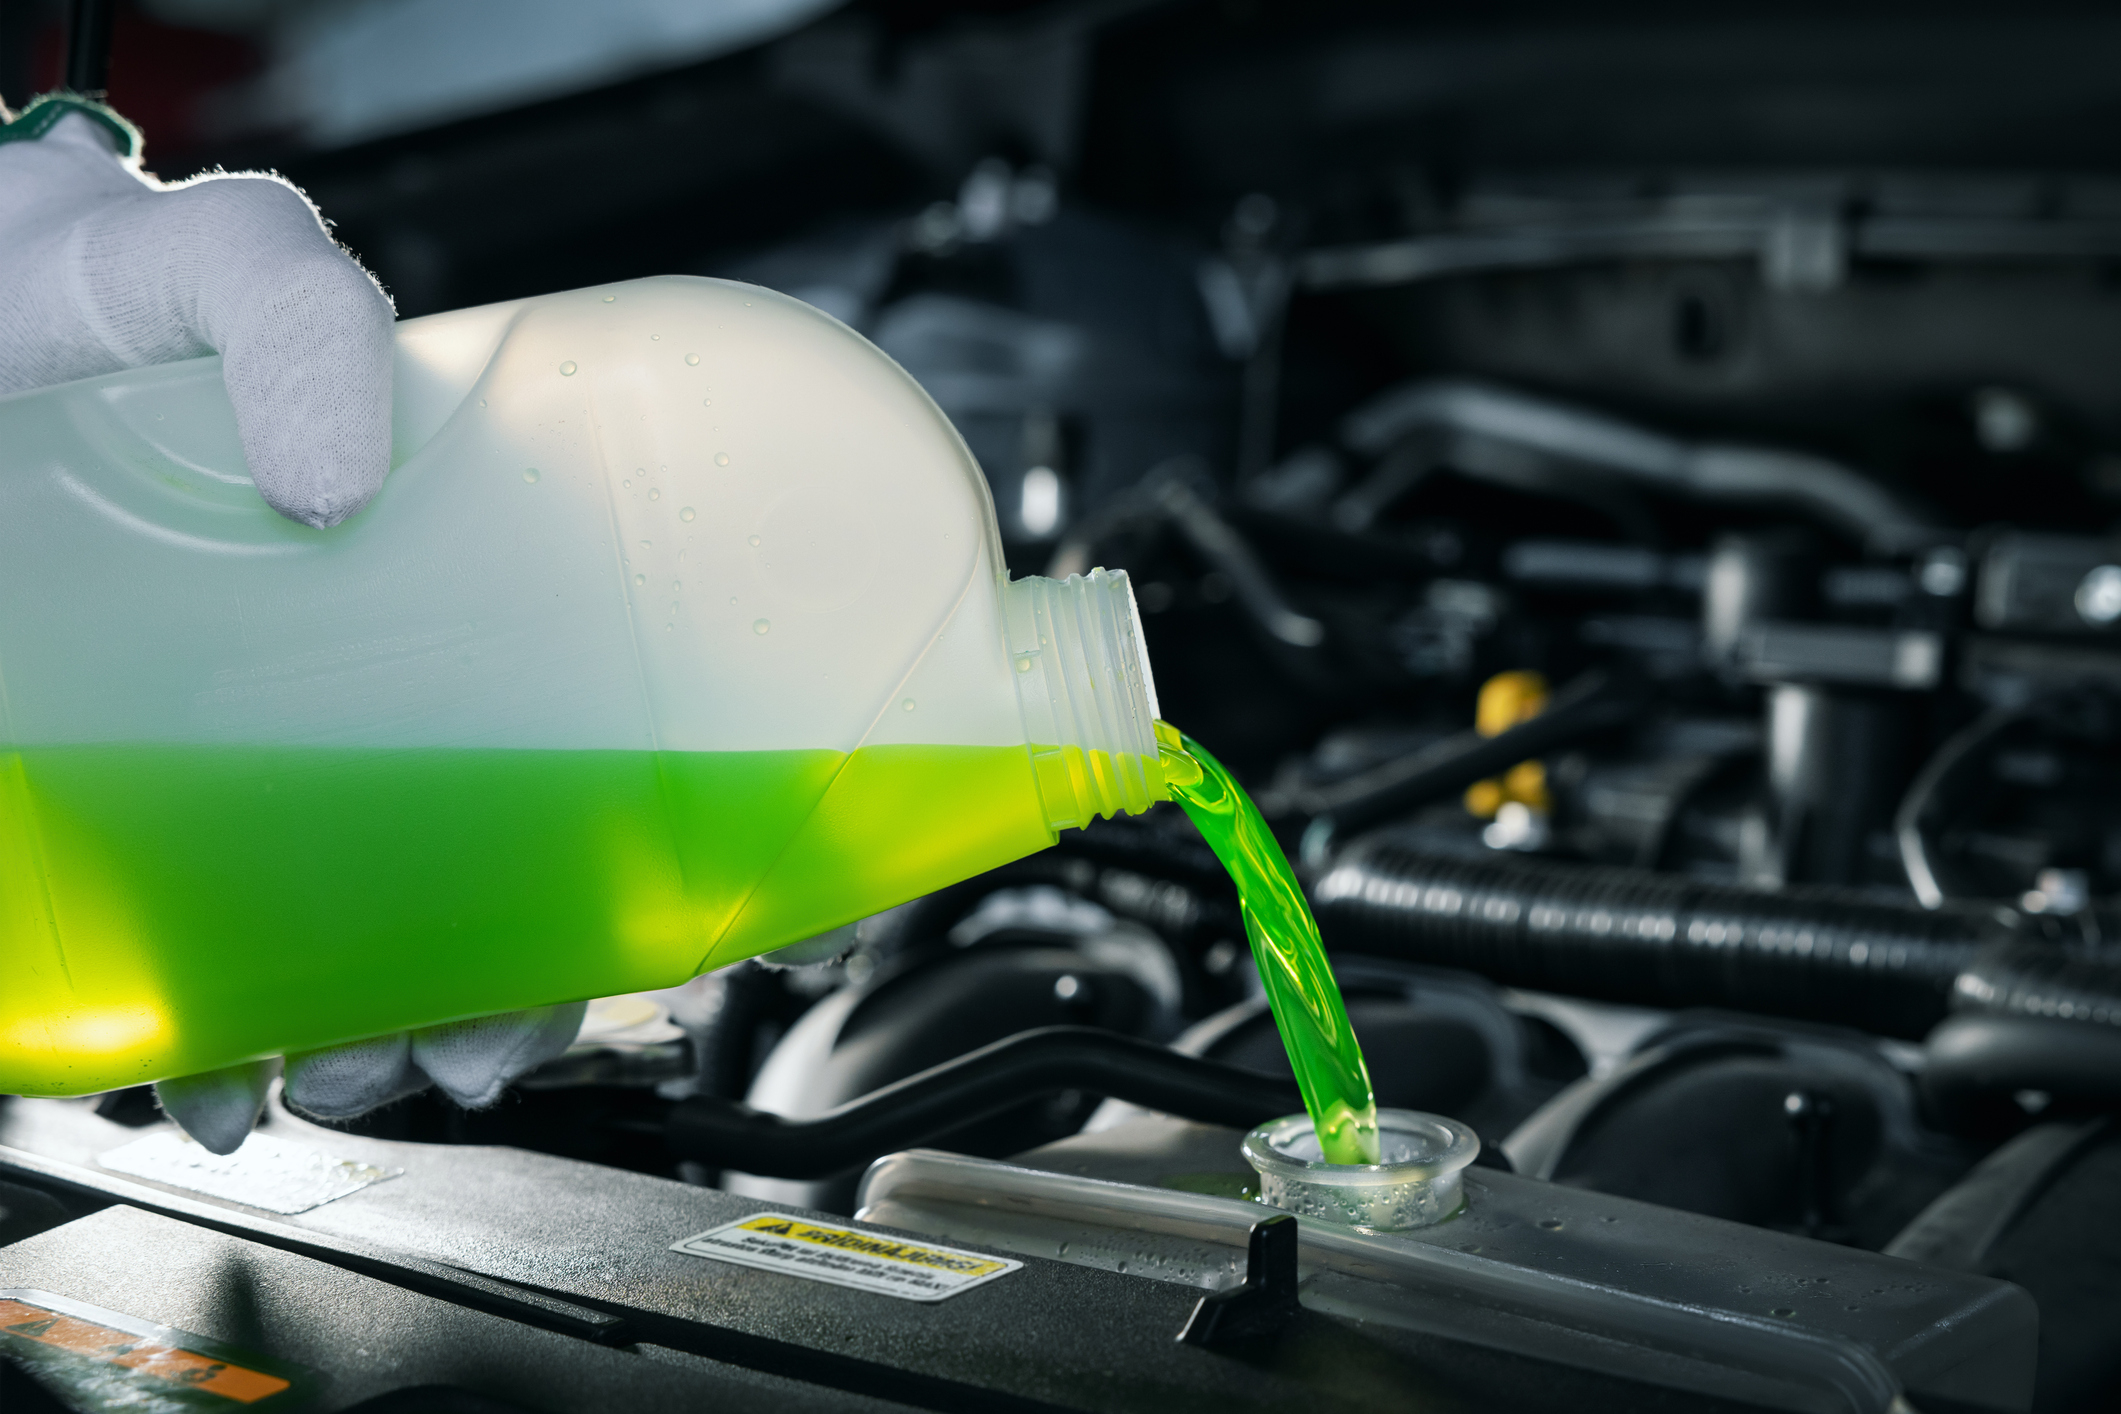 Pouring green coolant into a car engine from a plastic jug, with engine details visible